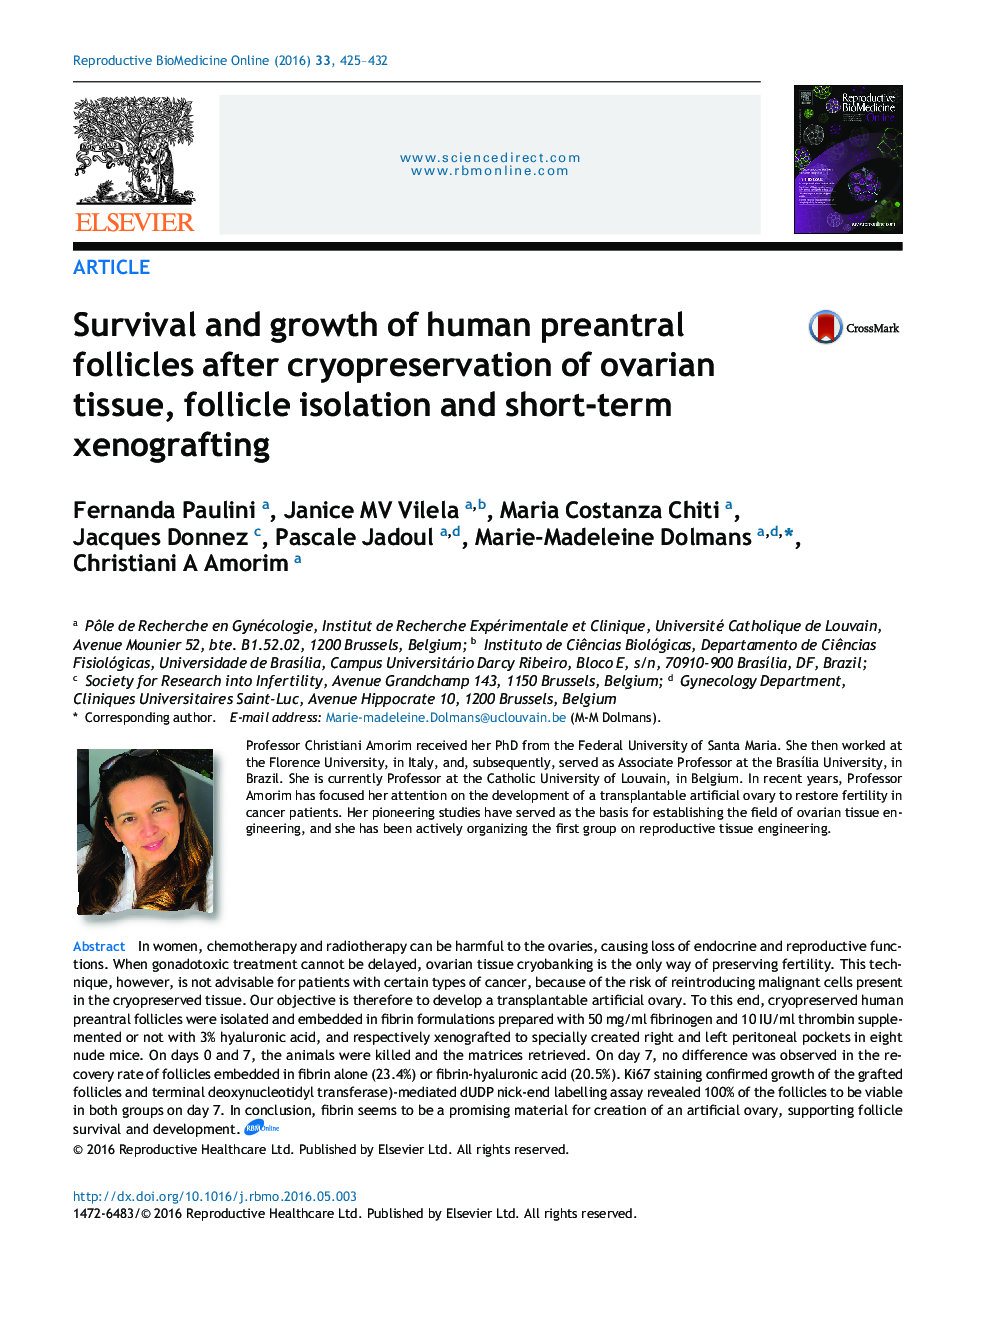 Survival and growth of human preantral follicles after cryopreservation of ovarian tissue, follicle isolation and short-term xenografting